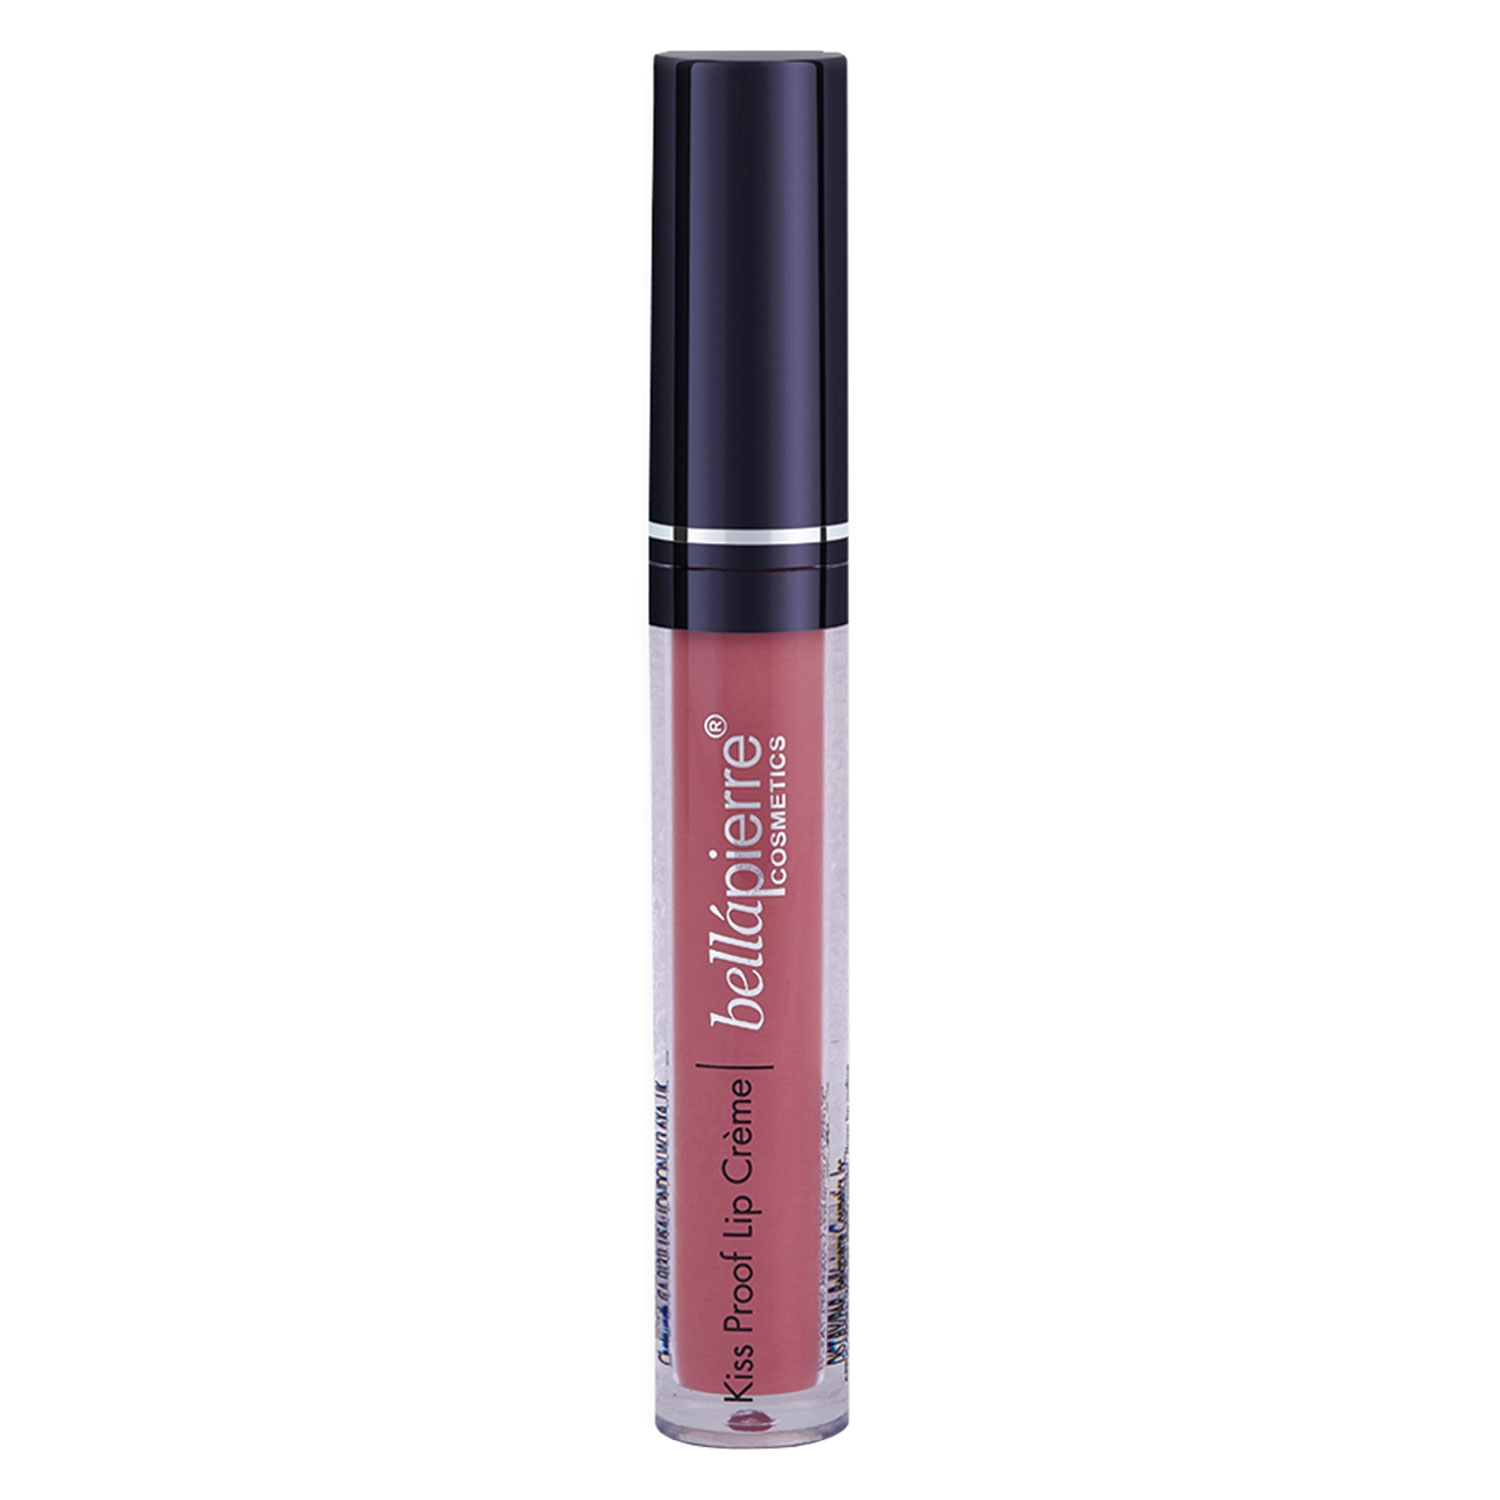 Product image from bellapierre Lips - Kiss Proof Lip Crème Antique Pink